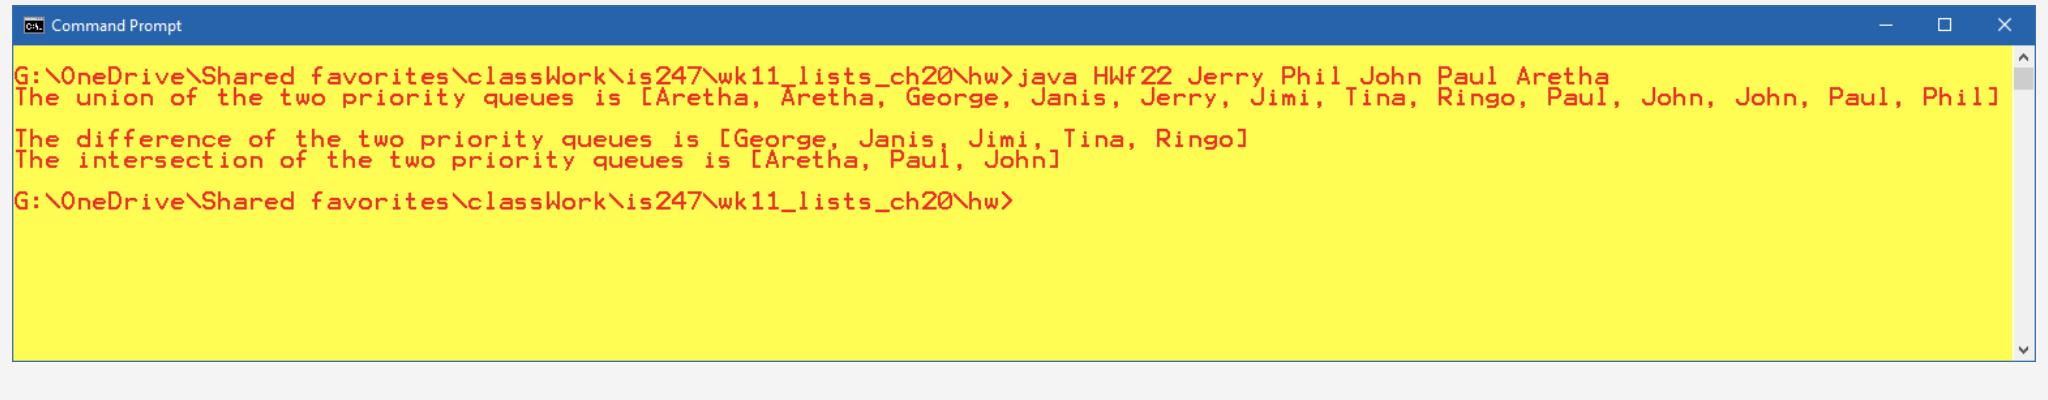 C. Command Prompt X G: OneDrive Shared favoritesclass Work is247wk11_lists_ch20hw> java HWf 22 Jerry Phil